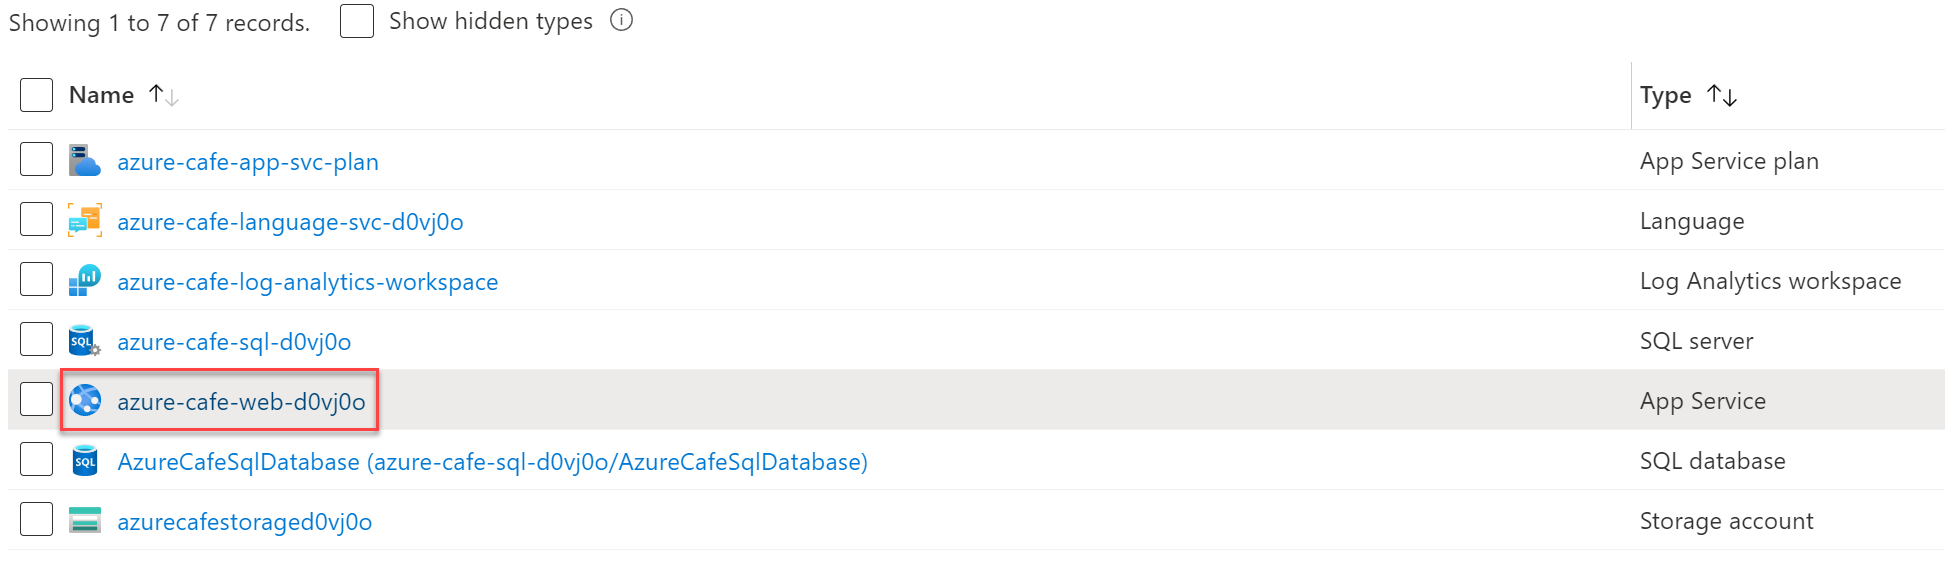 Screenshot of the application-insights-azure-cafe resource group in the Azure portal with the azure-cafe-web-{SUFFIX} resource highlighted.